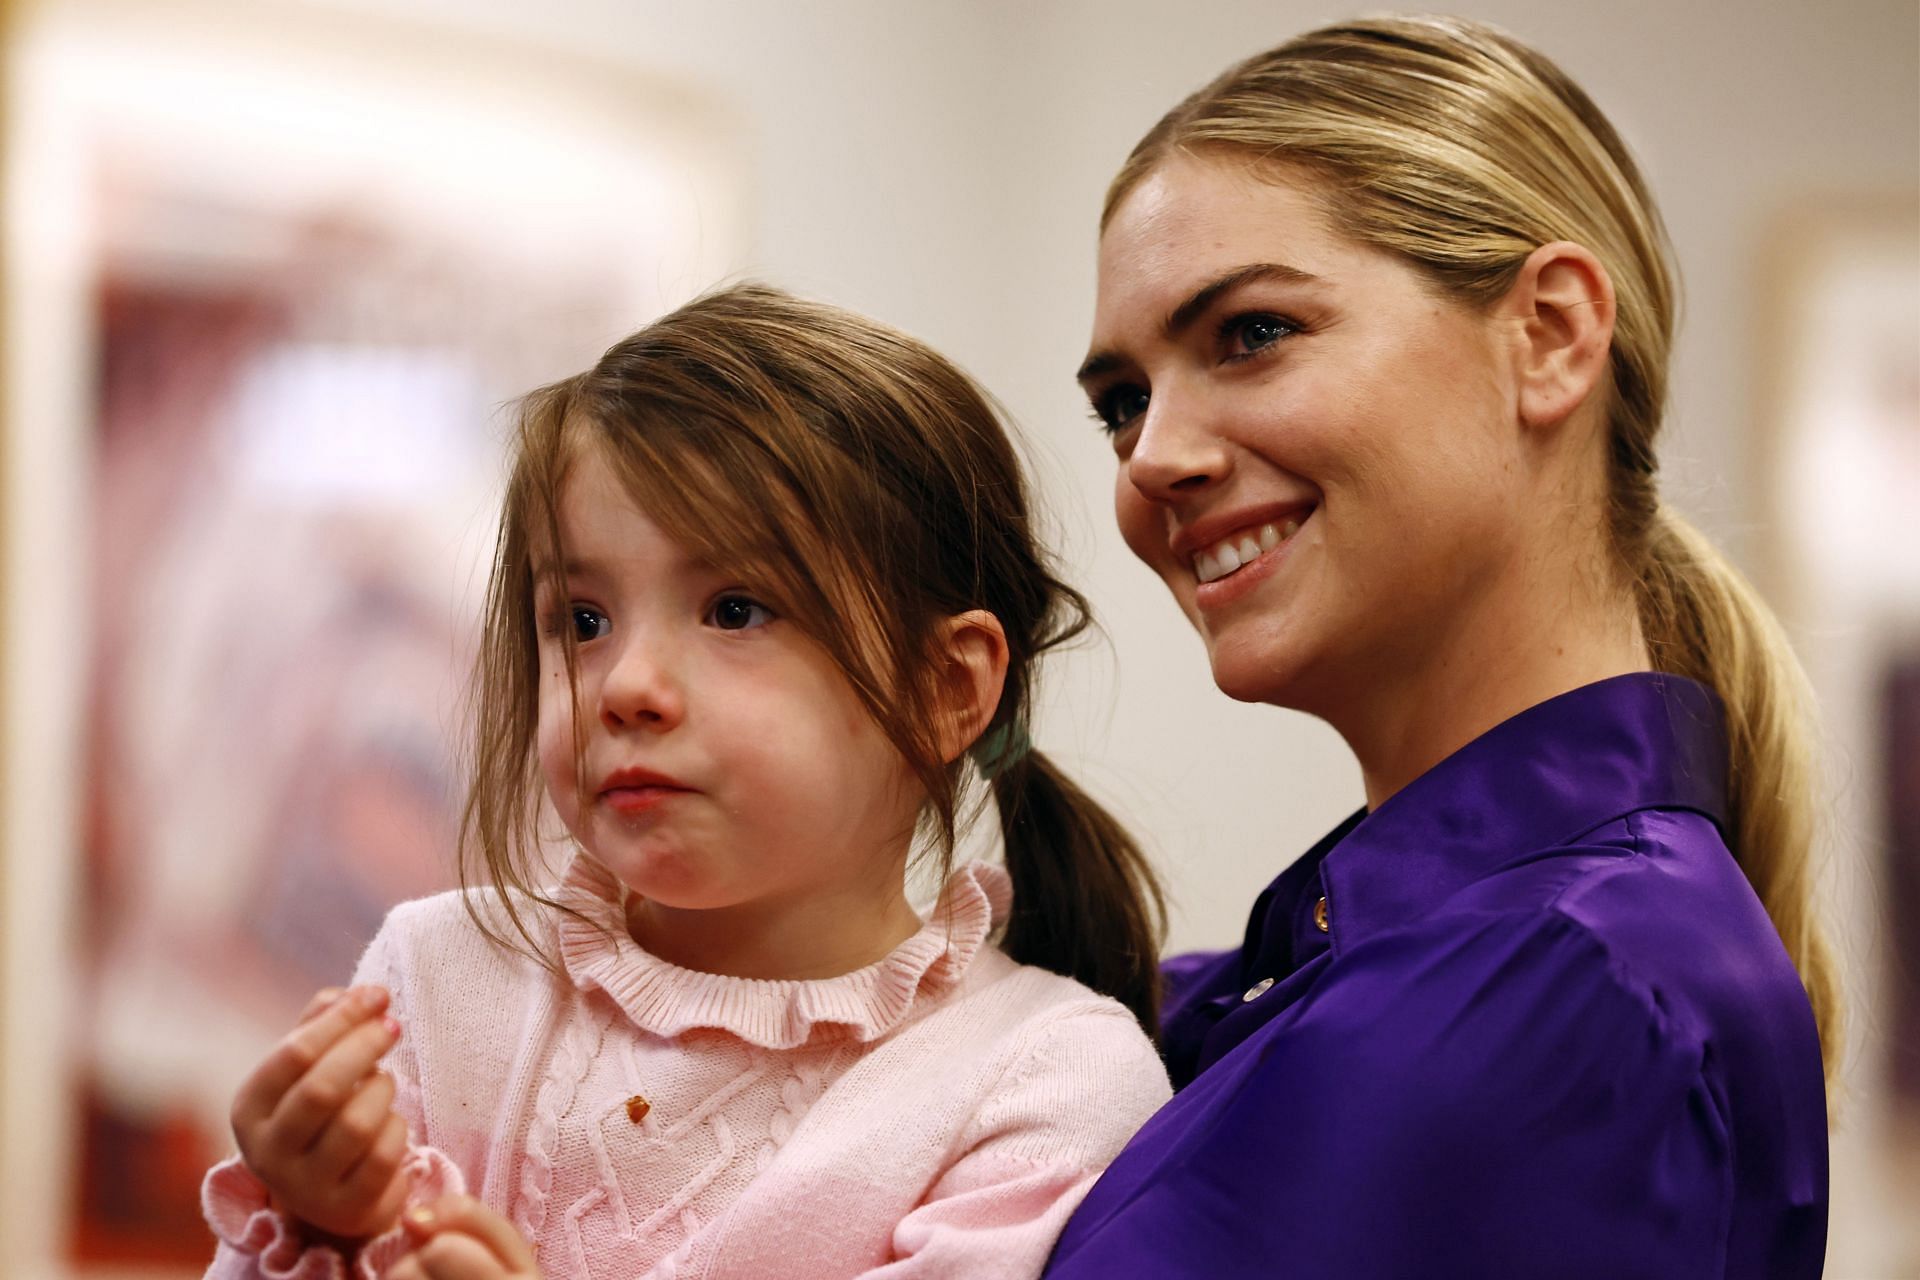 In pictures: Kate Upton and daughter Genevieve were rooting for Justin  Verlander at All-Star ace's introductory press conference as a Met